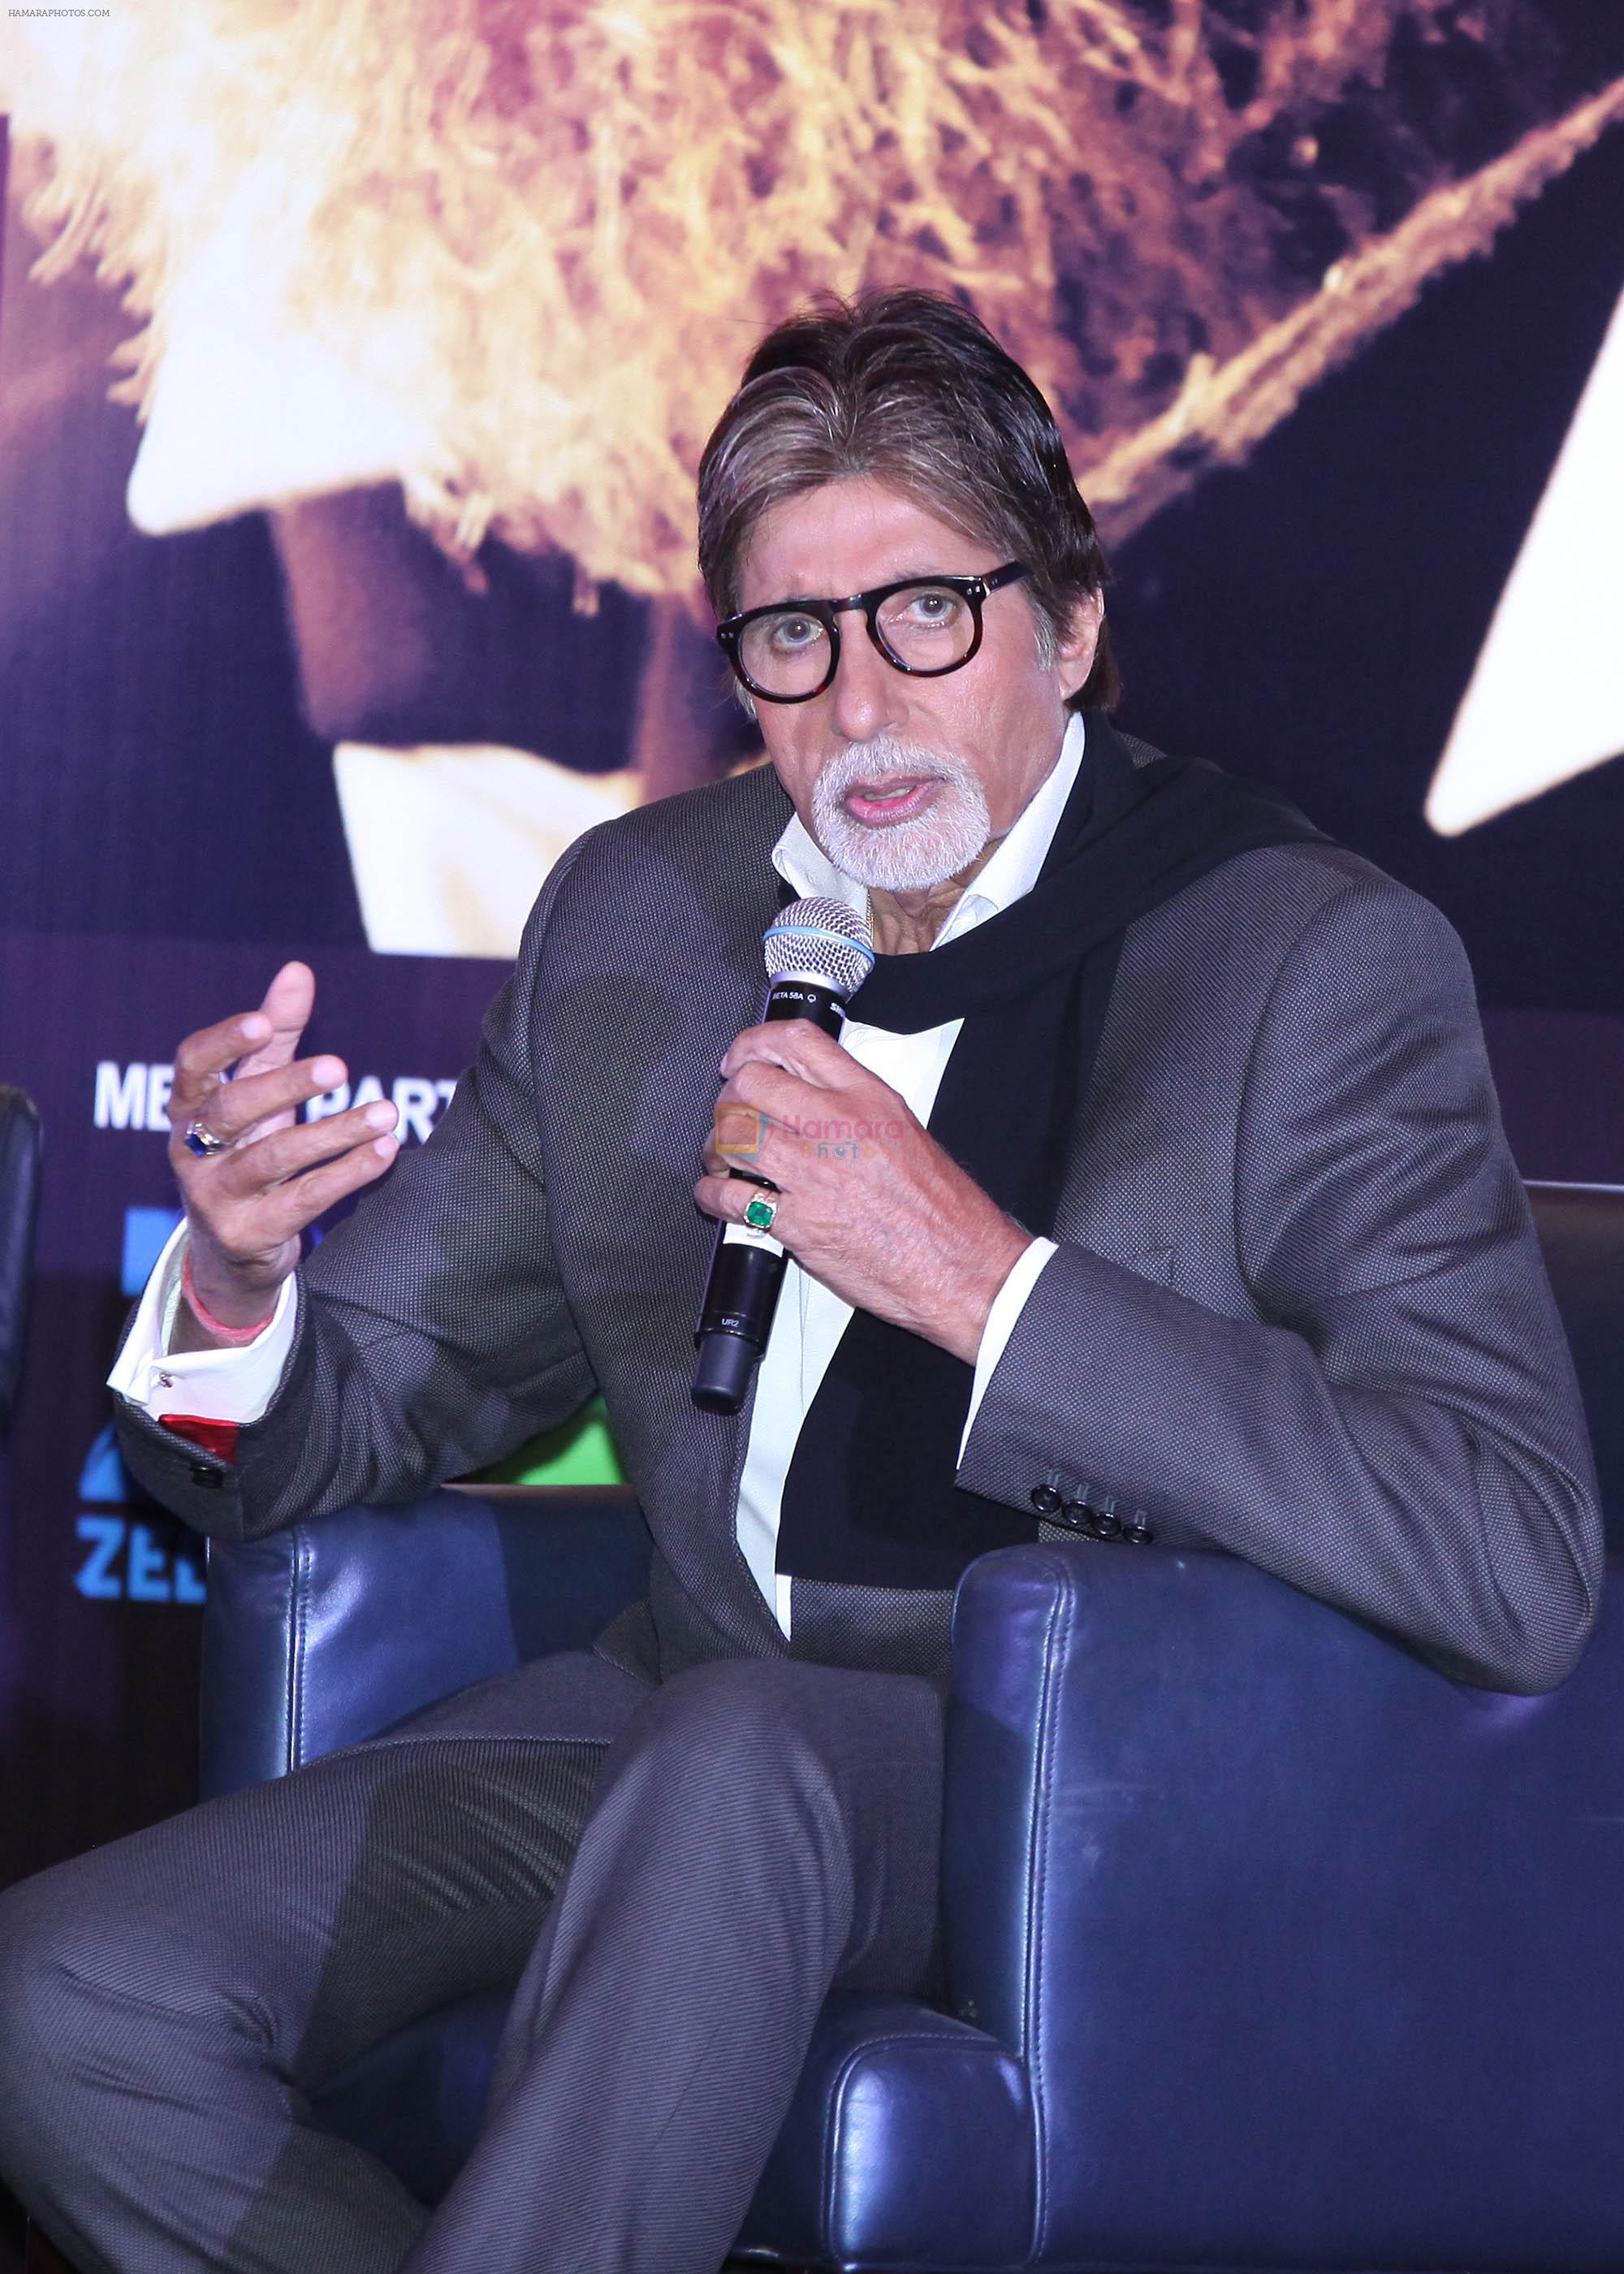 Amitabh Bachchan at the Premiere Production house, headed by Mr. Javed Shafi hosted a perfect evening to Shamitabh in the UAE on 29th Jan 2015